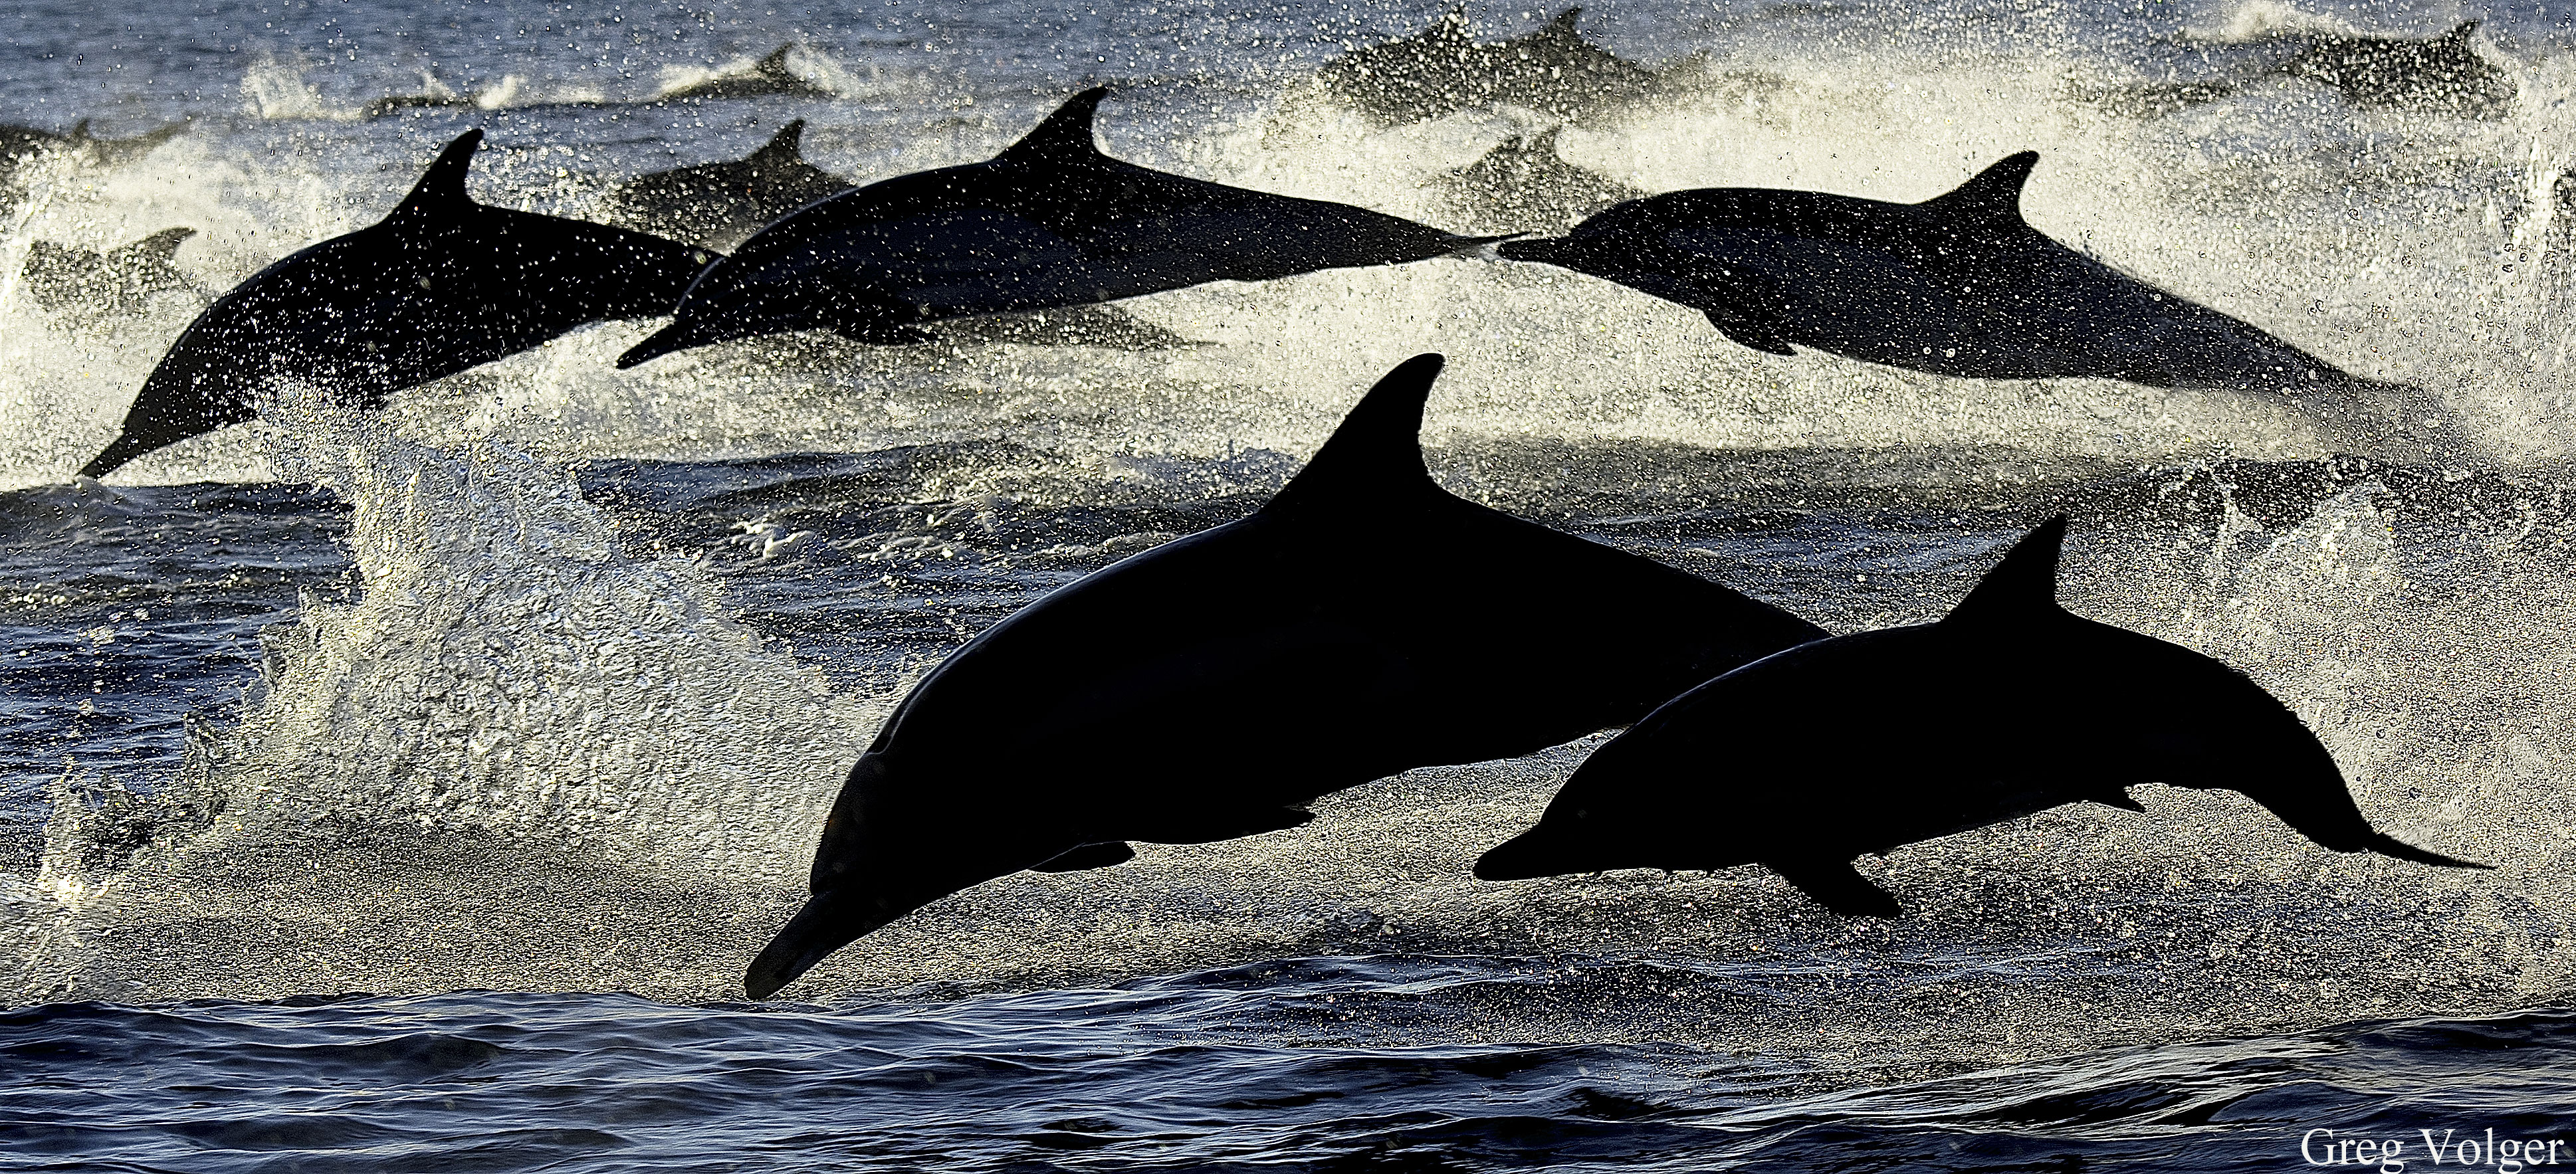 Photo of a school of leaping dolphins, by Greg Volger